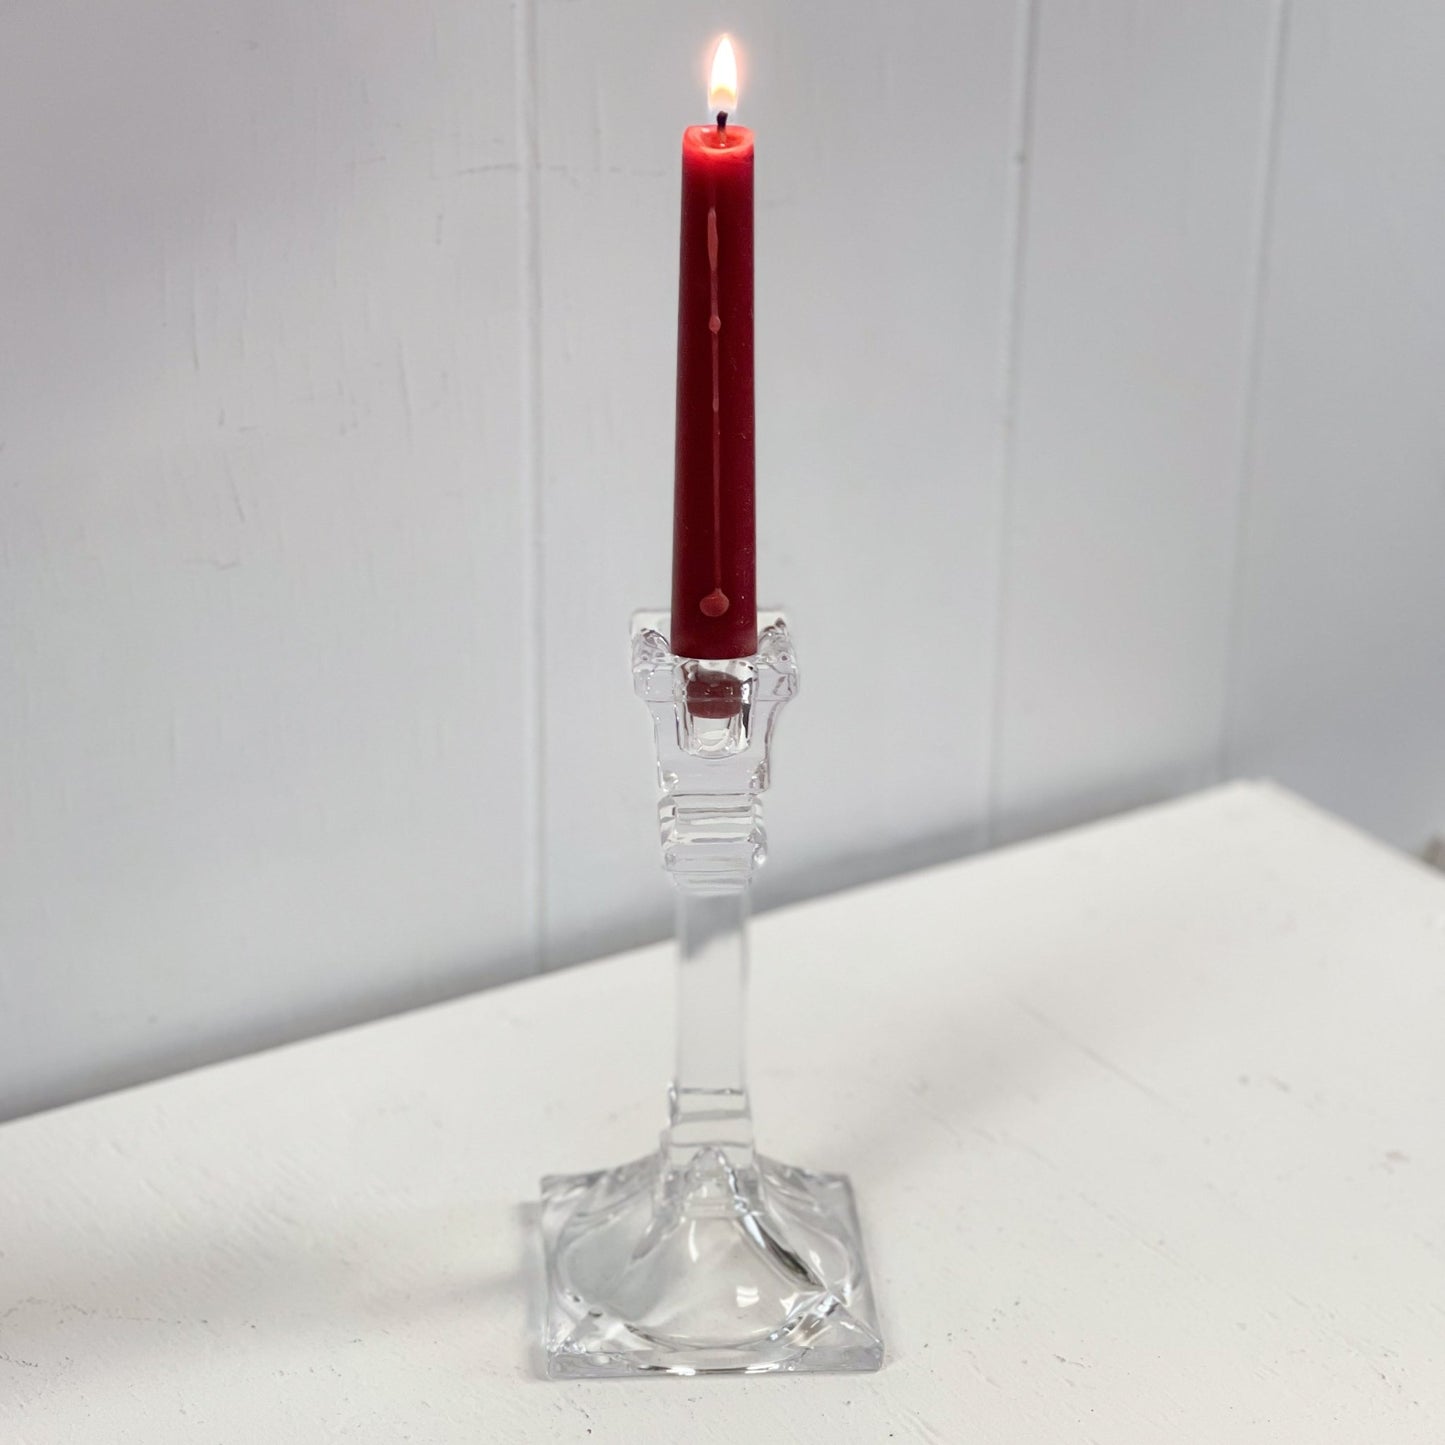 Lead Crystal Candlestick Holder by The Toscany Collection-The Toscany Collection-Candlestick Holder-Stockton Farm